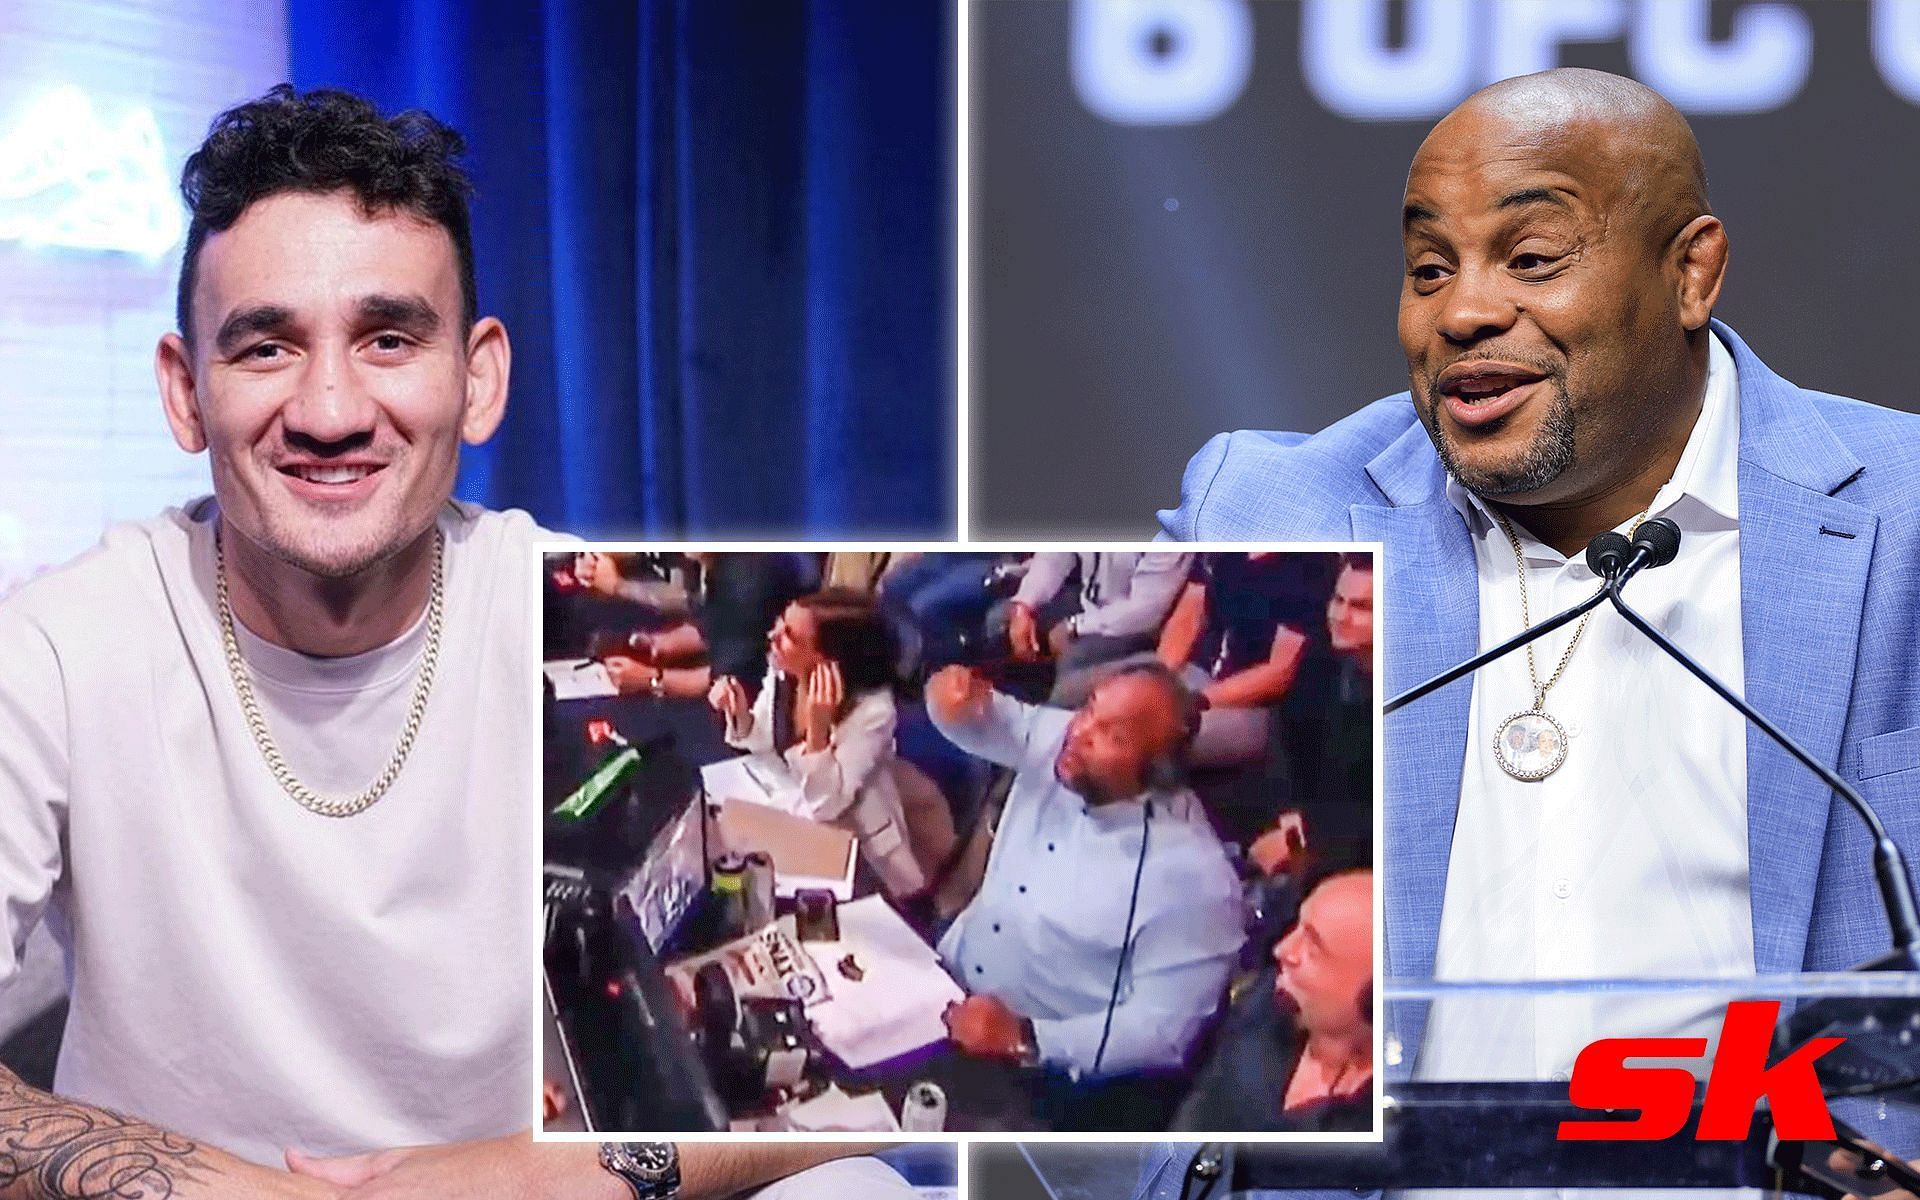 Daniel Cormier explains why Max Holloway caught him eating [Images via: @blessedmma on Instagram and @dc_mma on Twitter]